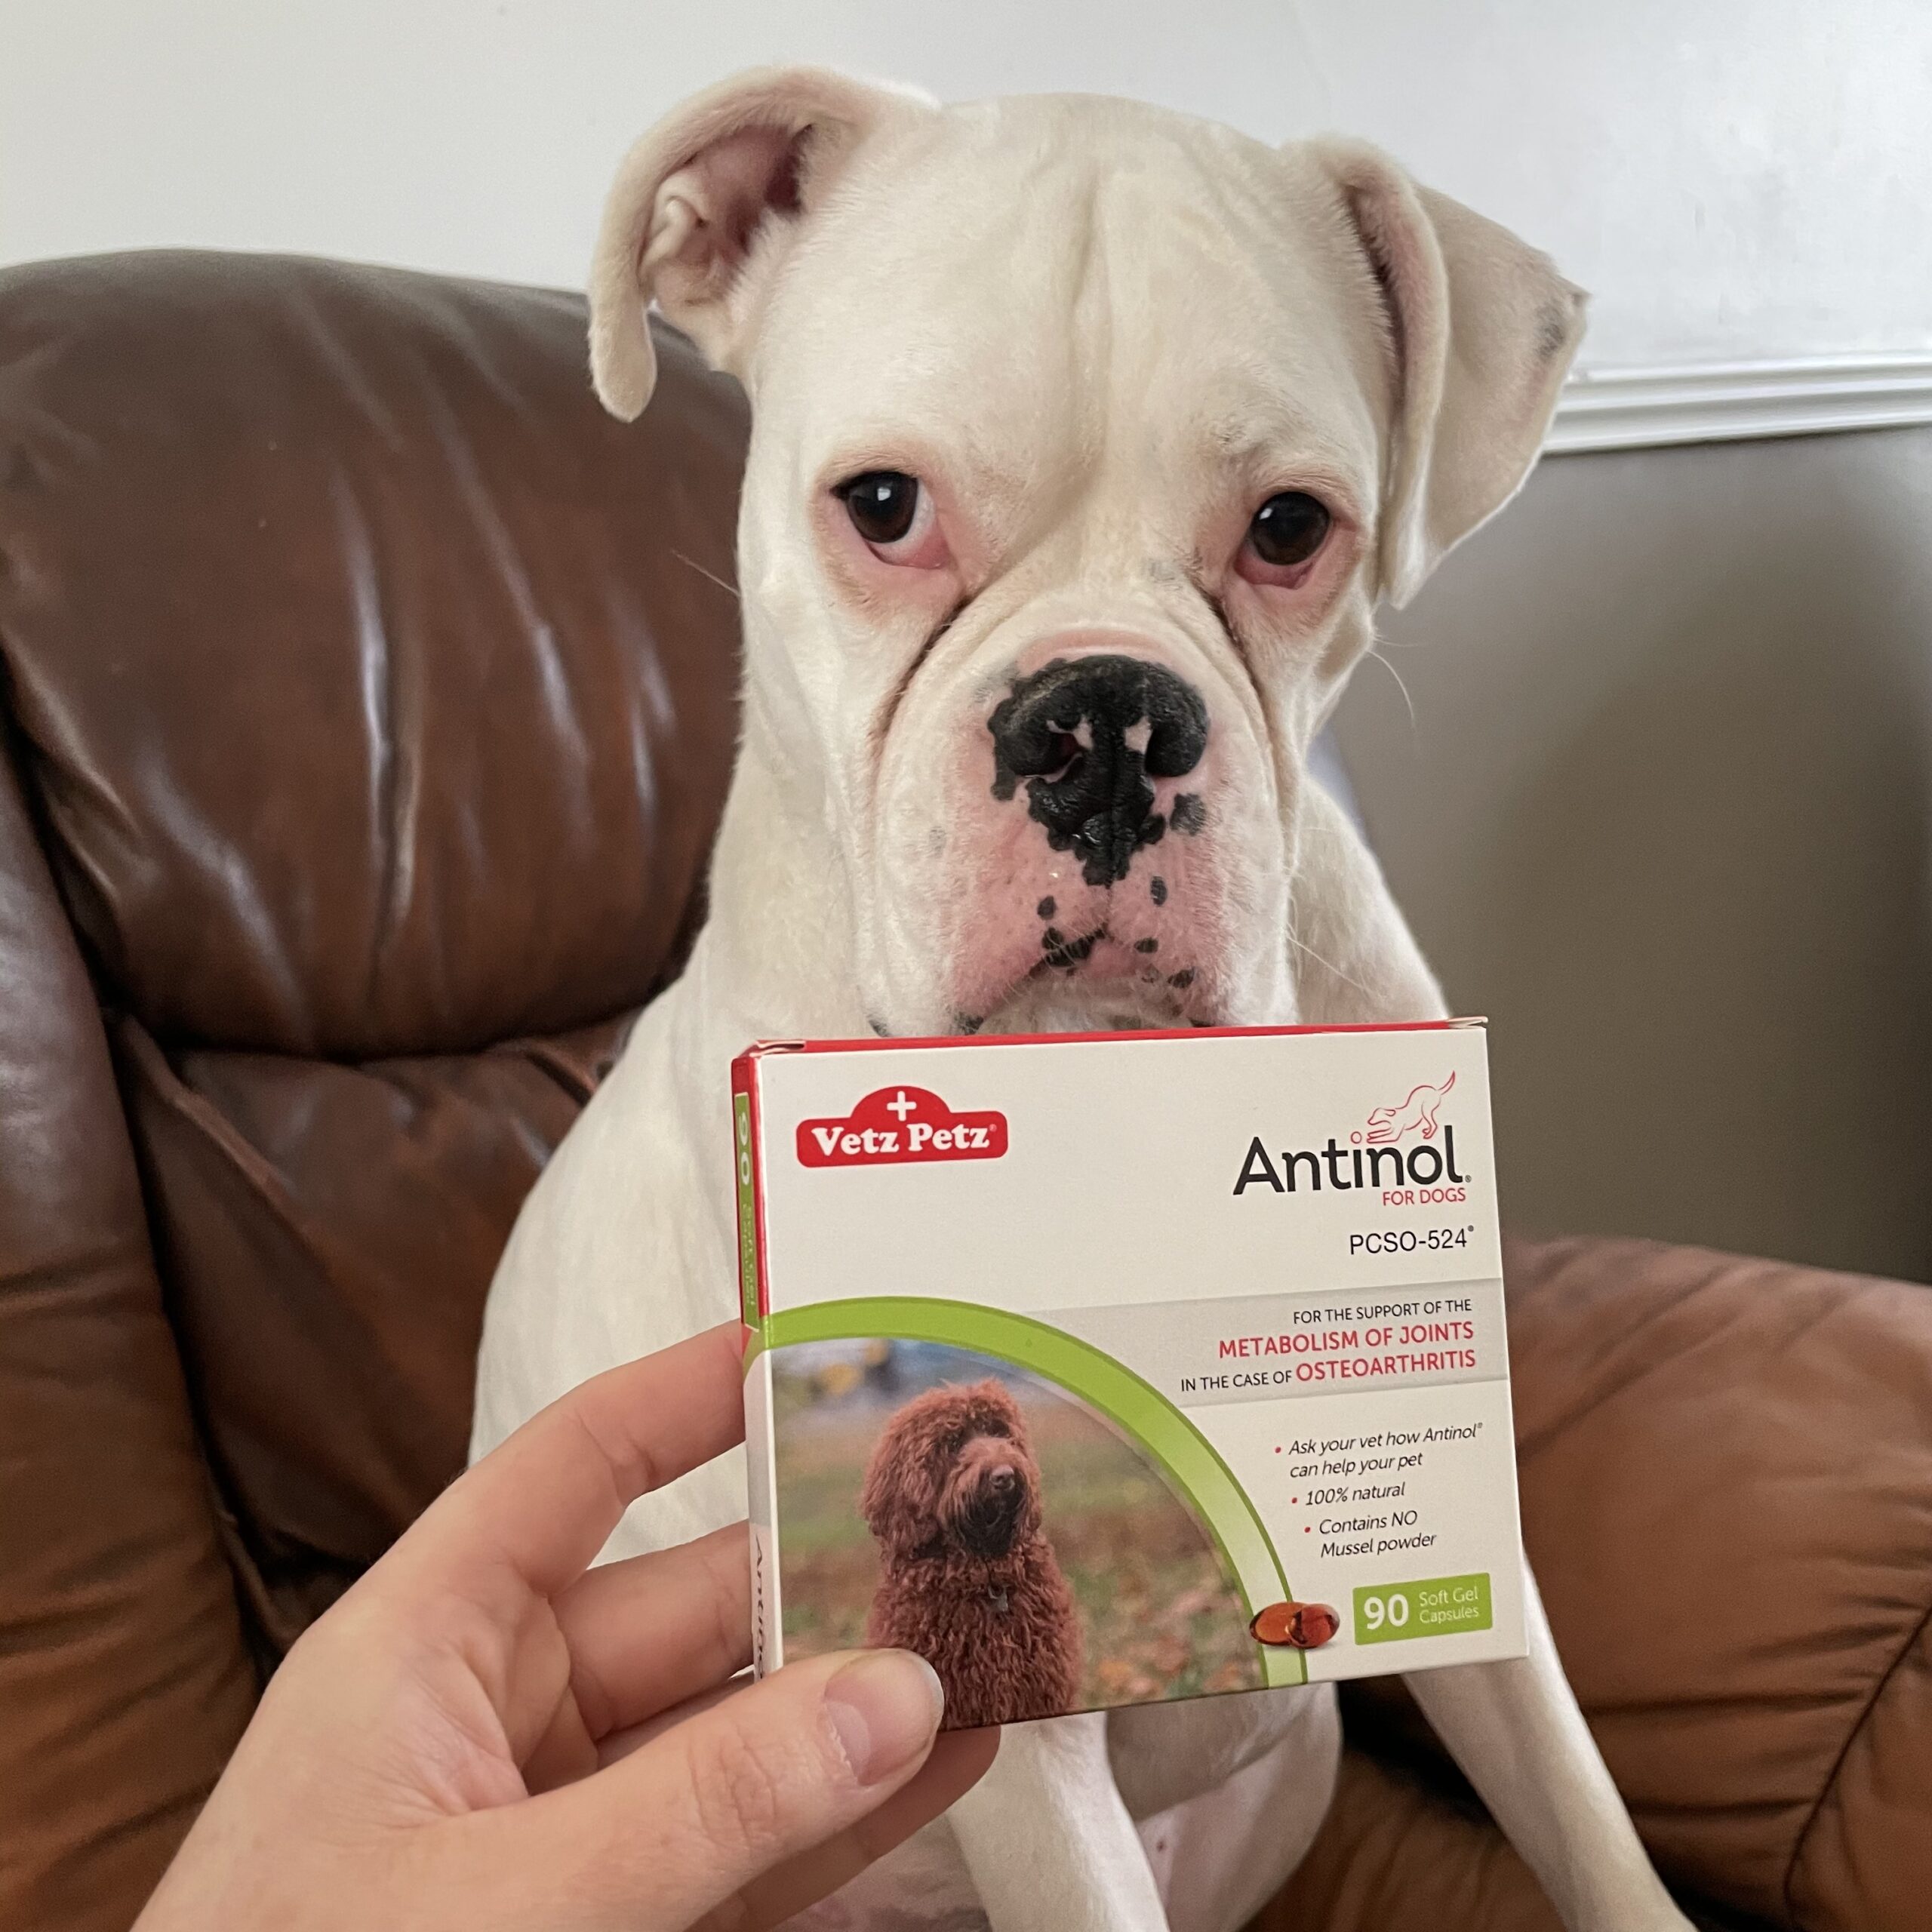 Monty, the white boxer sat down with a box of Antinol in front of him, sent for the Vetz Petz Antinol review